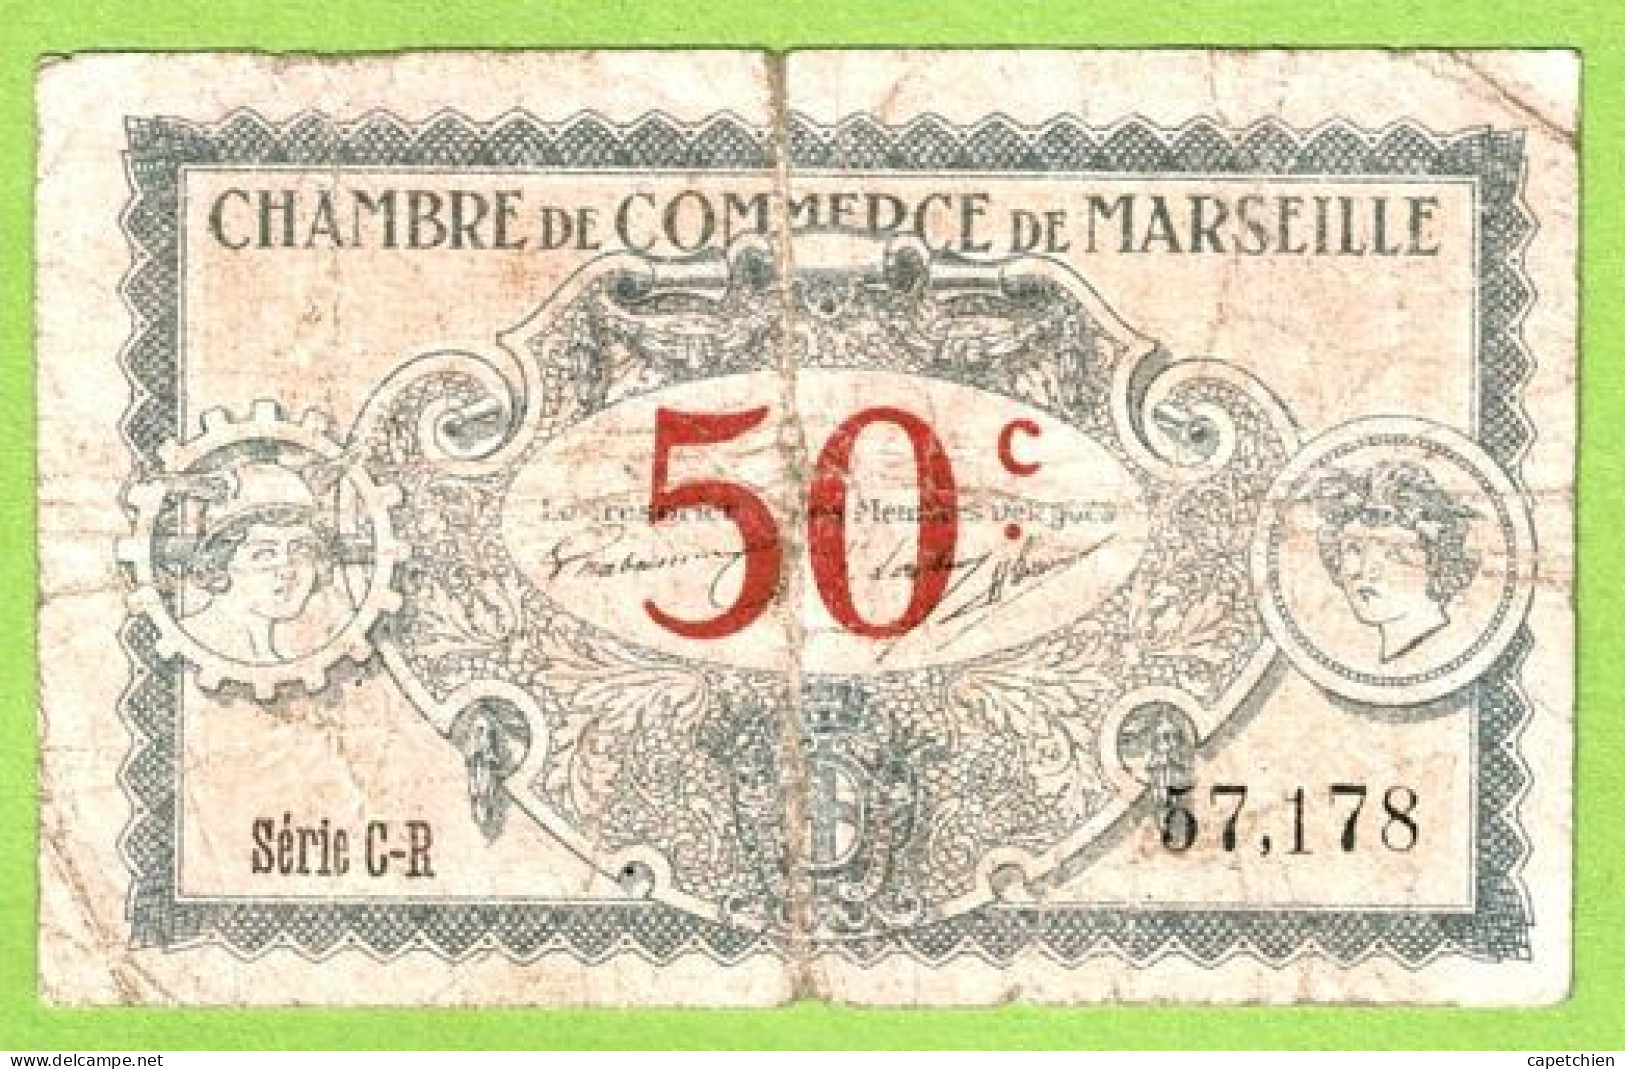 FRANCE / CHAMBRE De COMMERCE / MARSEILLE / 50 CENTIMES / 1917 / N° 57178 / SERIE C - R - Chamber Of Commerce